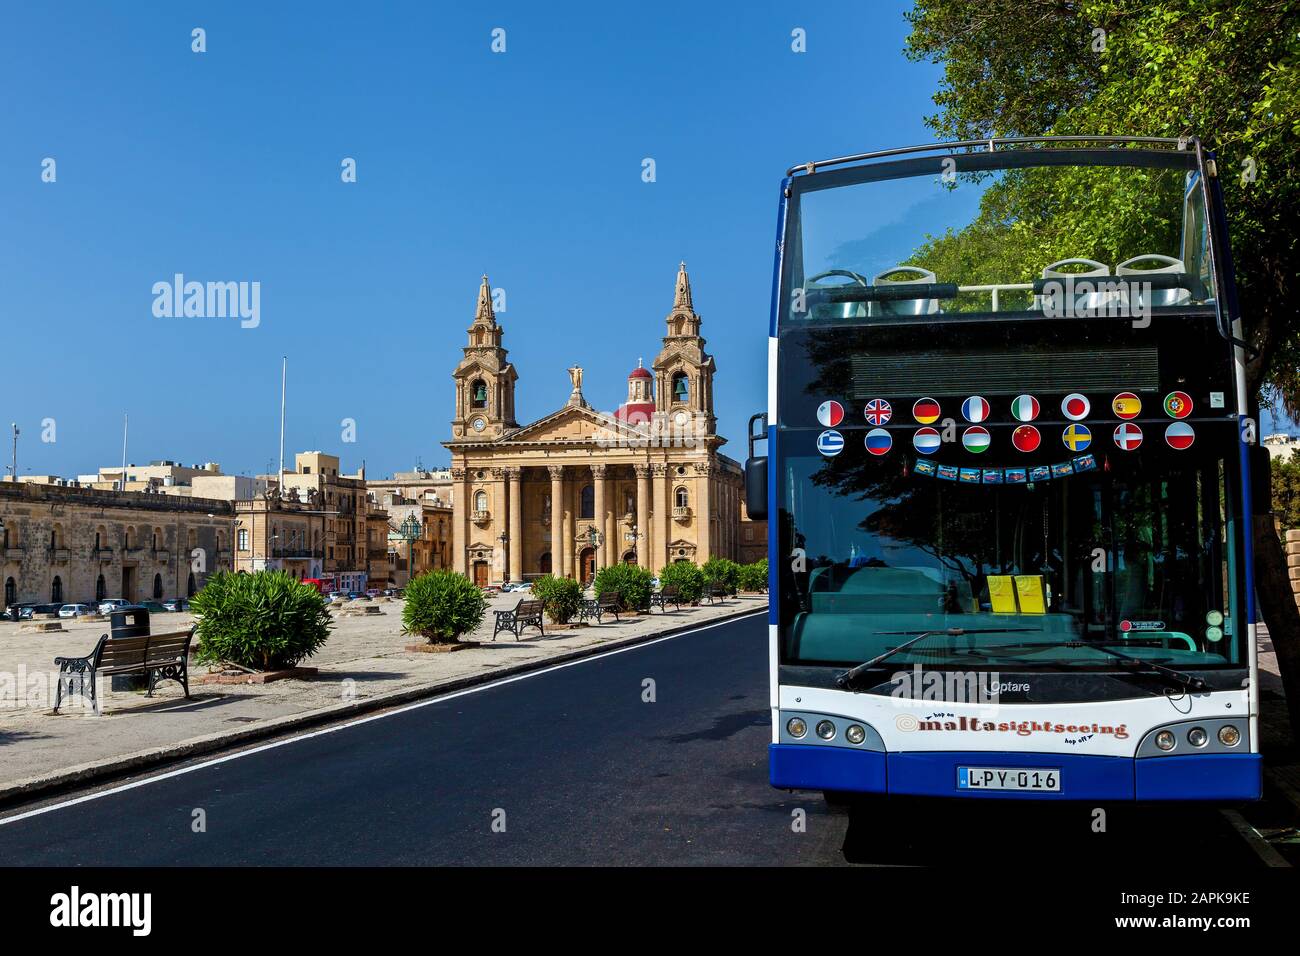 Valletta Malta June 18, 2019: Bus for tourists with routes to the interesting sights of the island of Malta Stock Photo